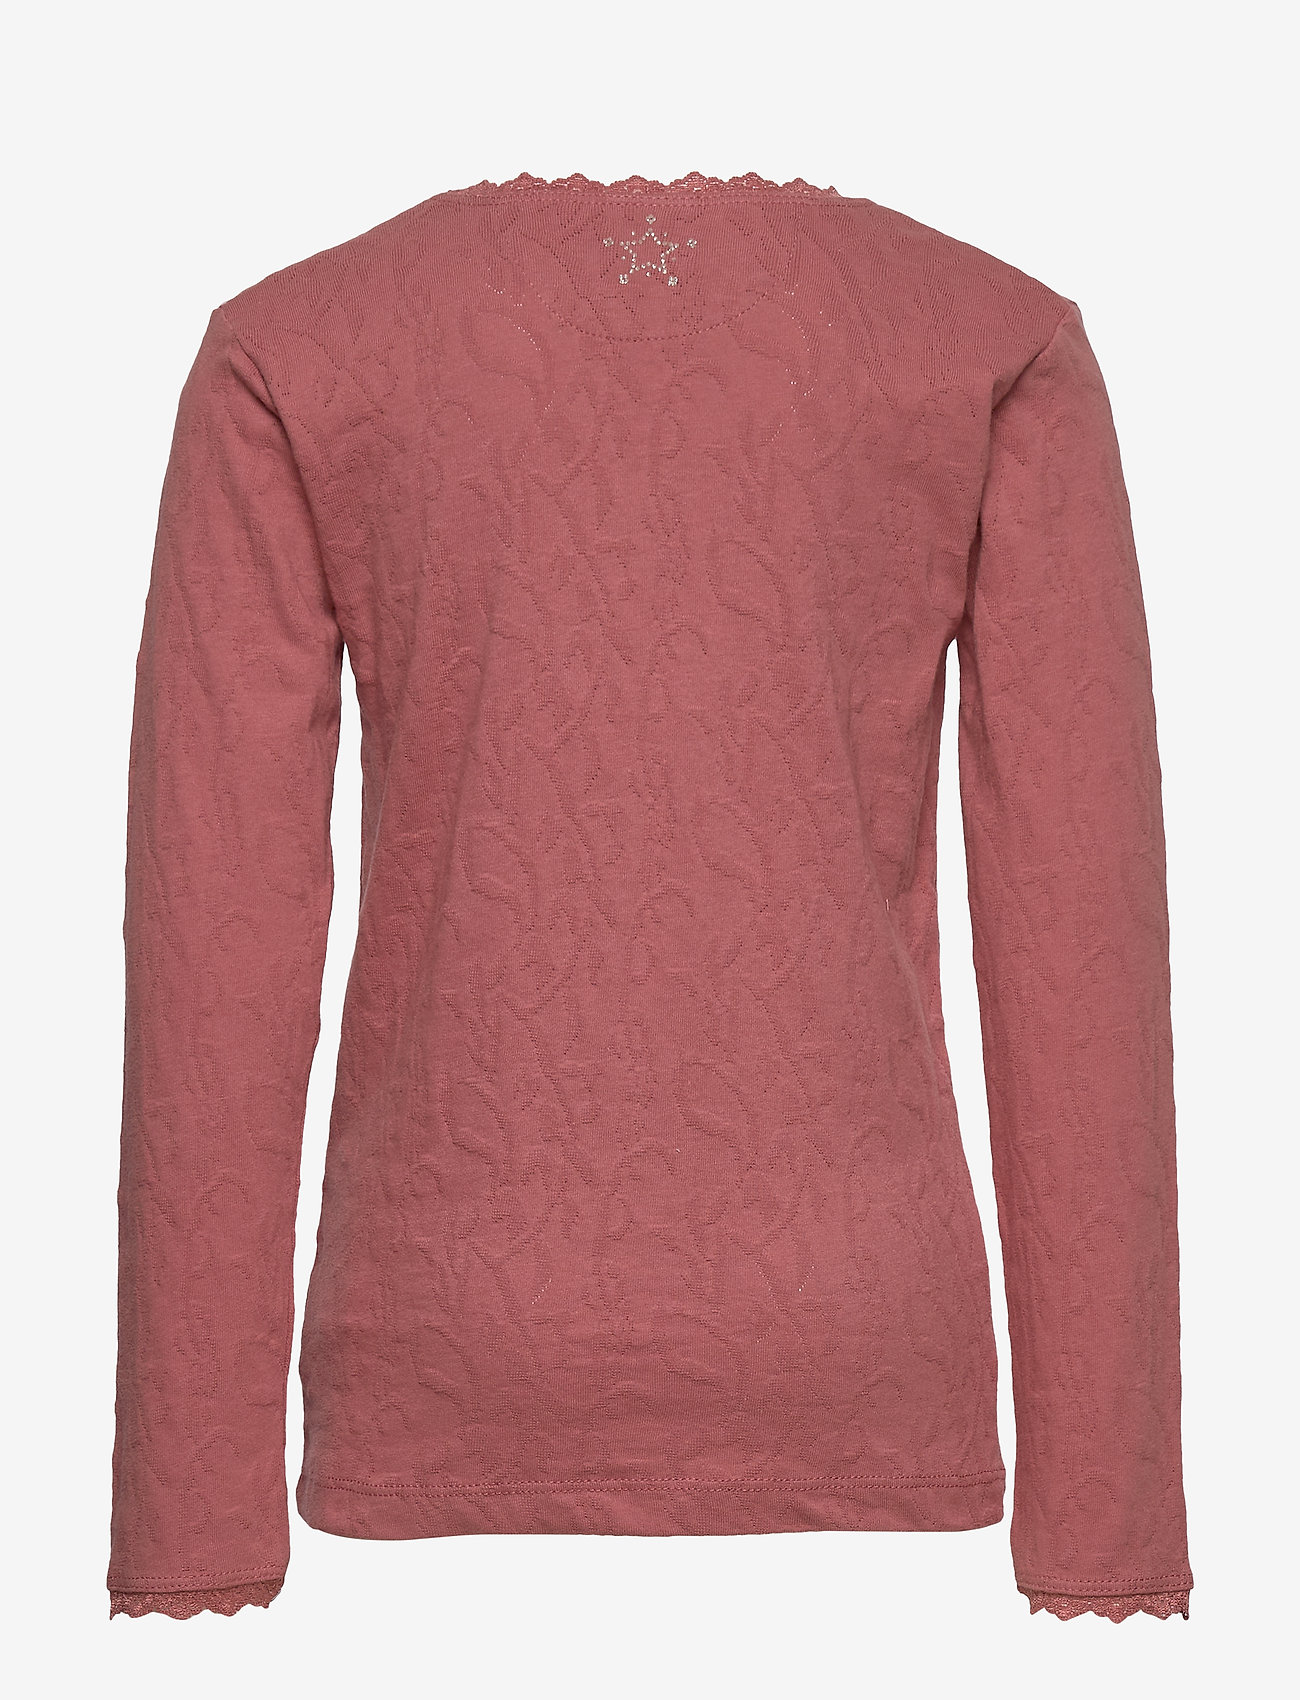 En Fant - Horizon LS Top - long-sleeved t-shirts - withered rose - 1